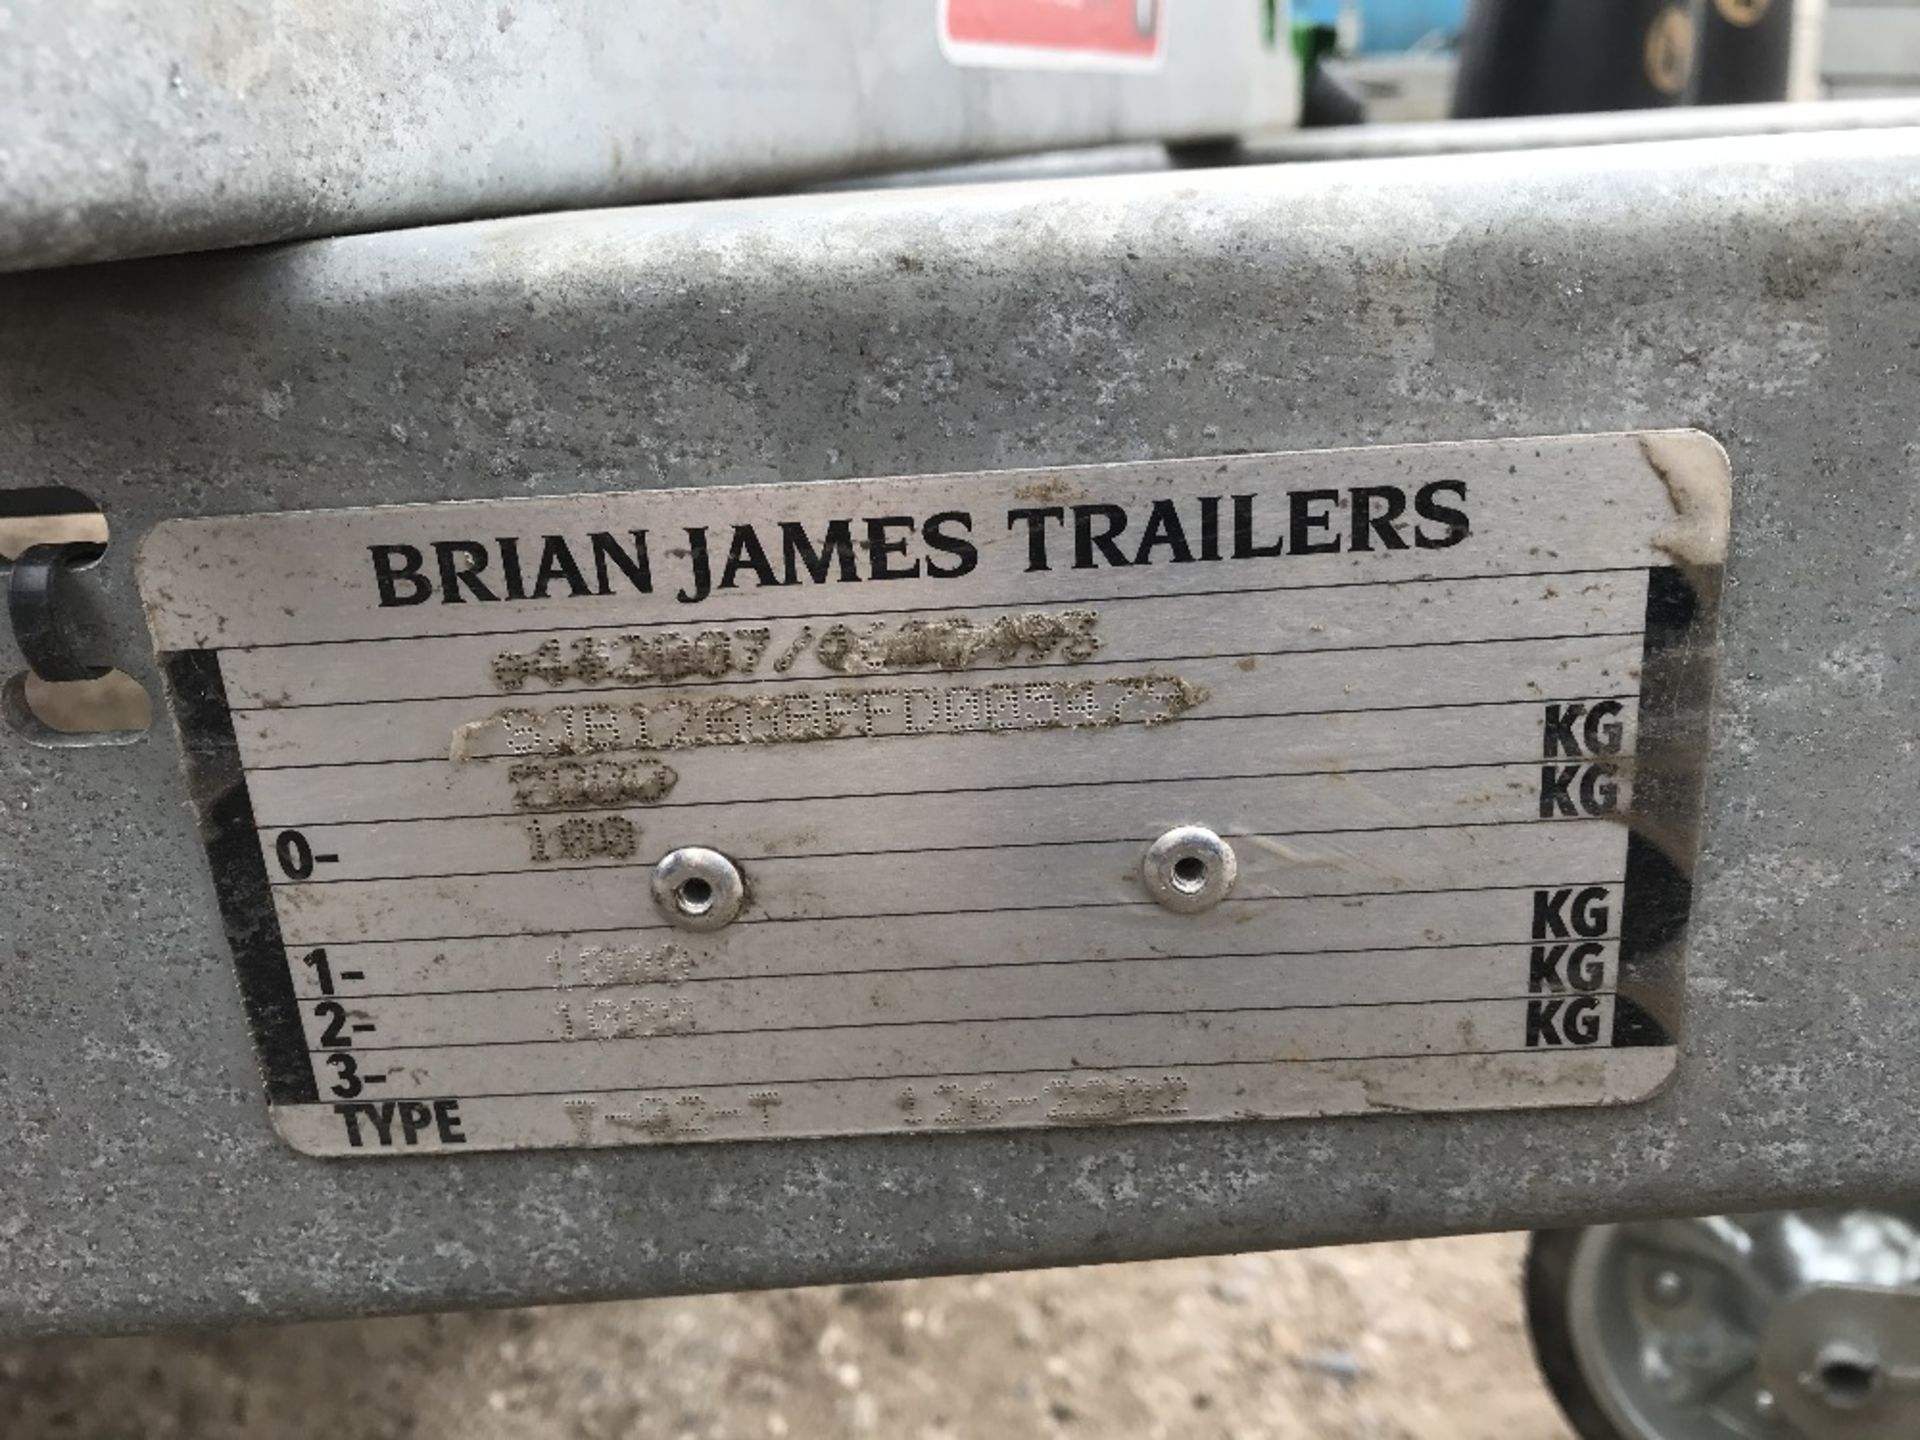 BRIAN JAMES TRAILER, 2000Kg, WITH KEYS SN: 5479 - Image 6 of 6